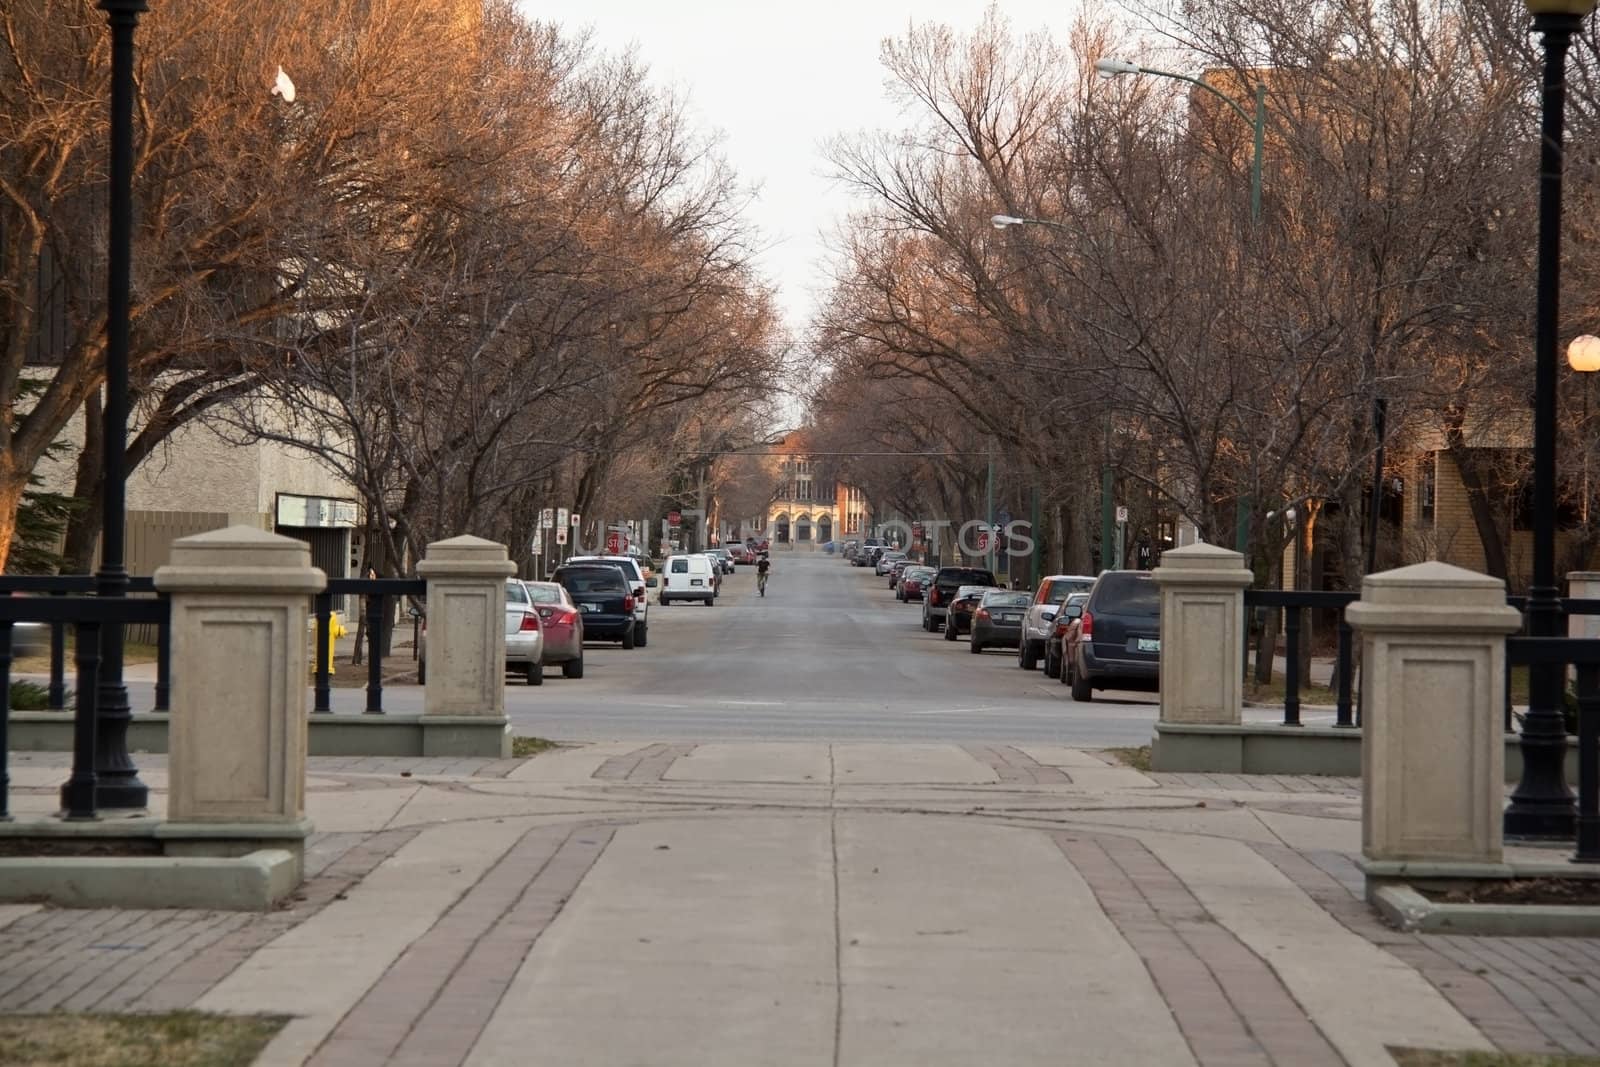 Deserted street in downtown regina with the rays of the setting sun giving life to the dry leafless trees